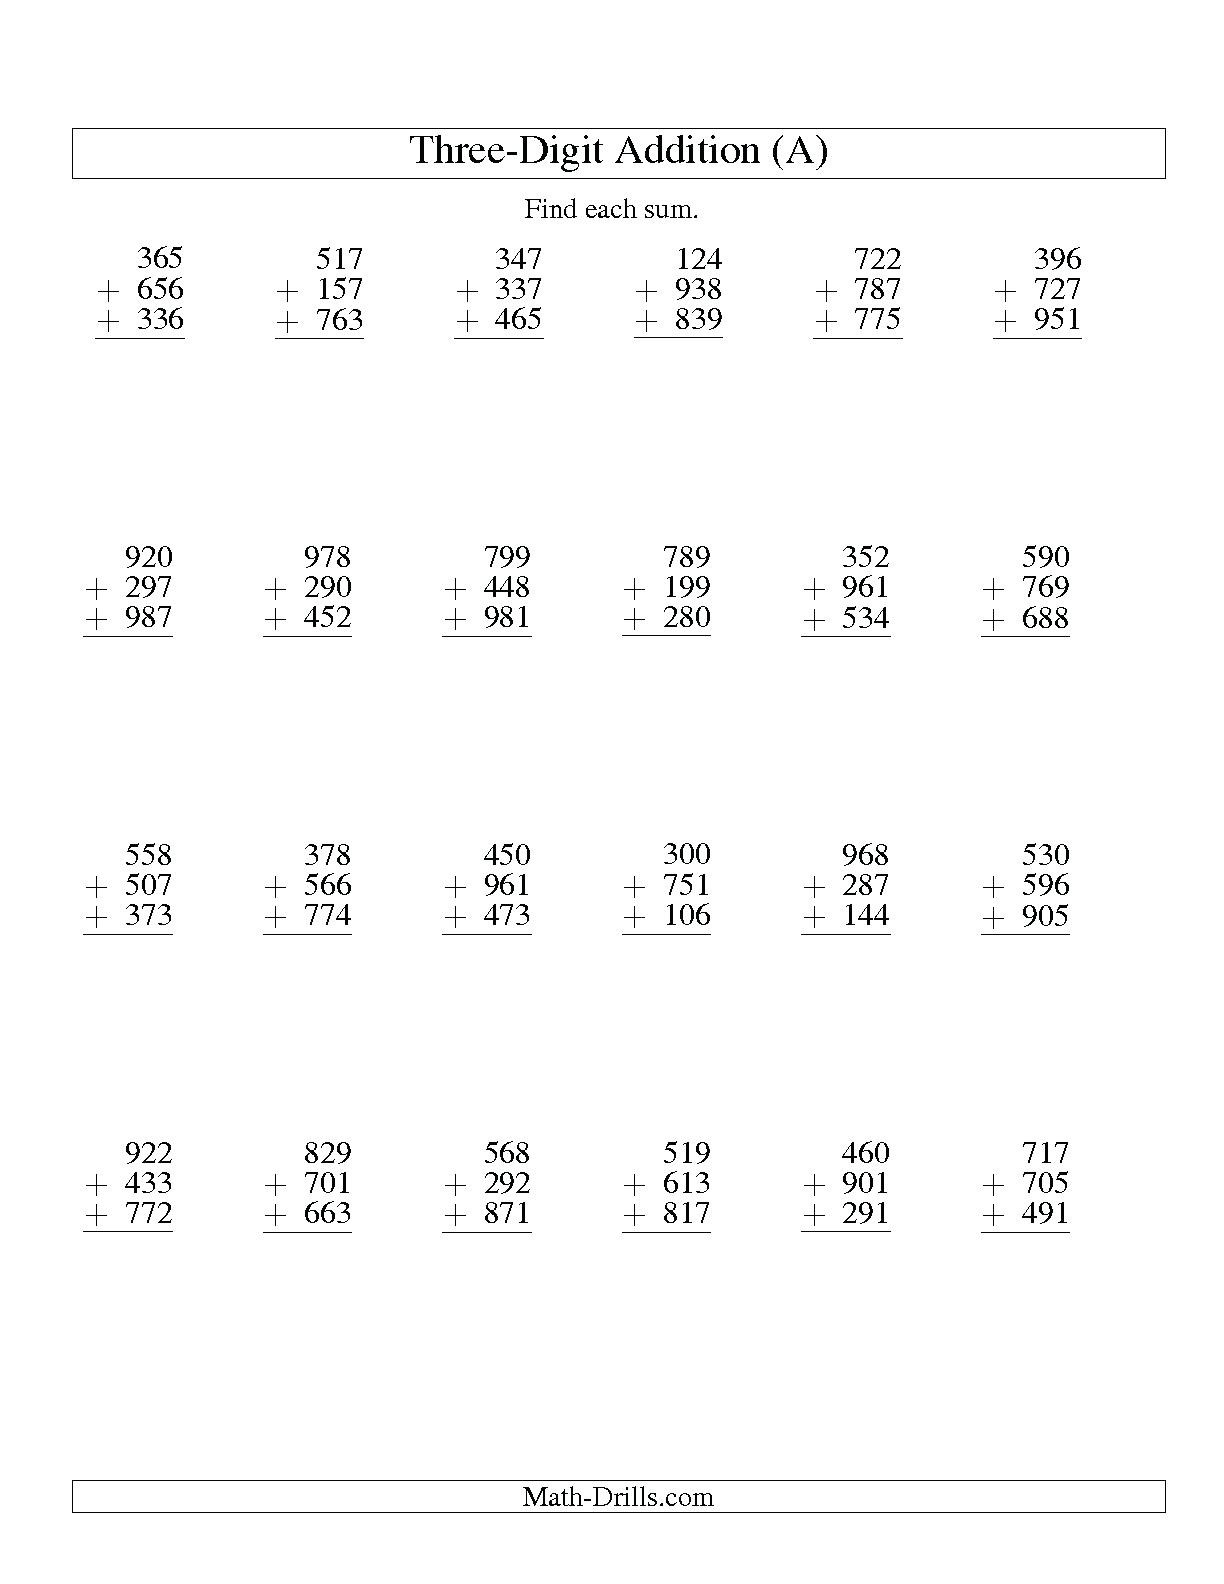 Free Math Worksheets Third Grade 3 Addition Add 3 4 Digit Numbers In Columns